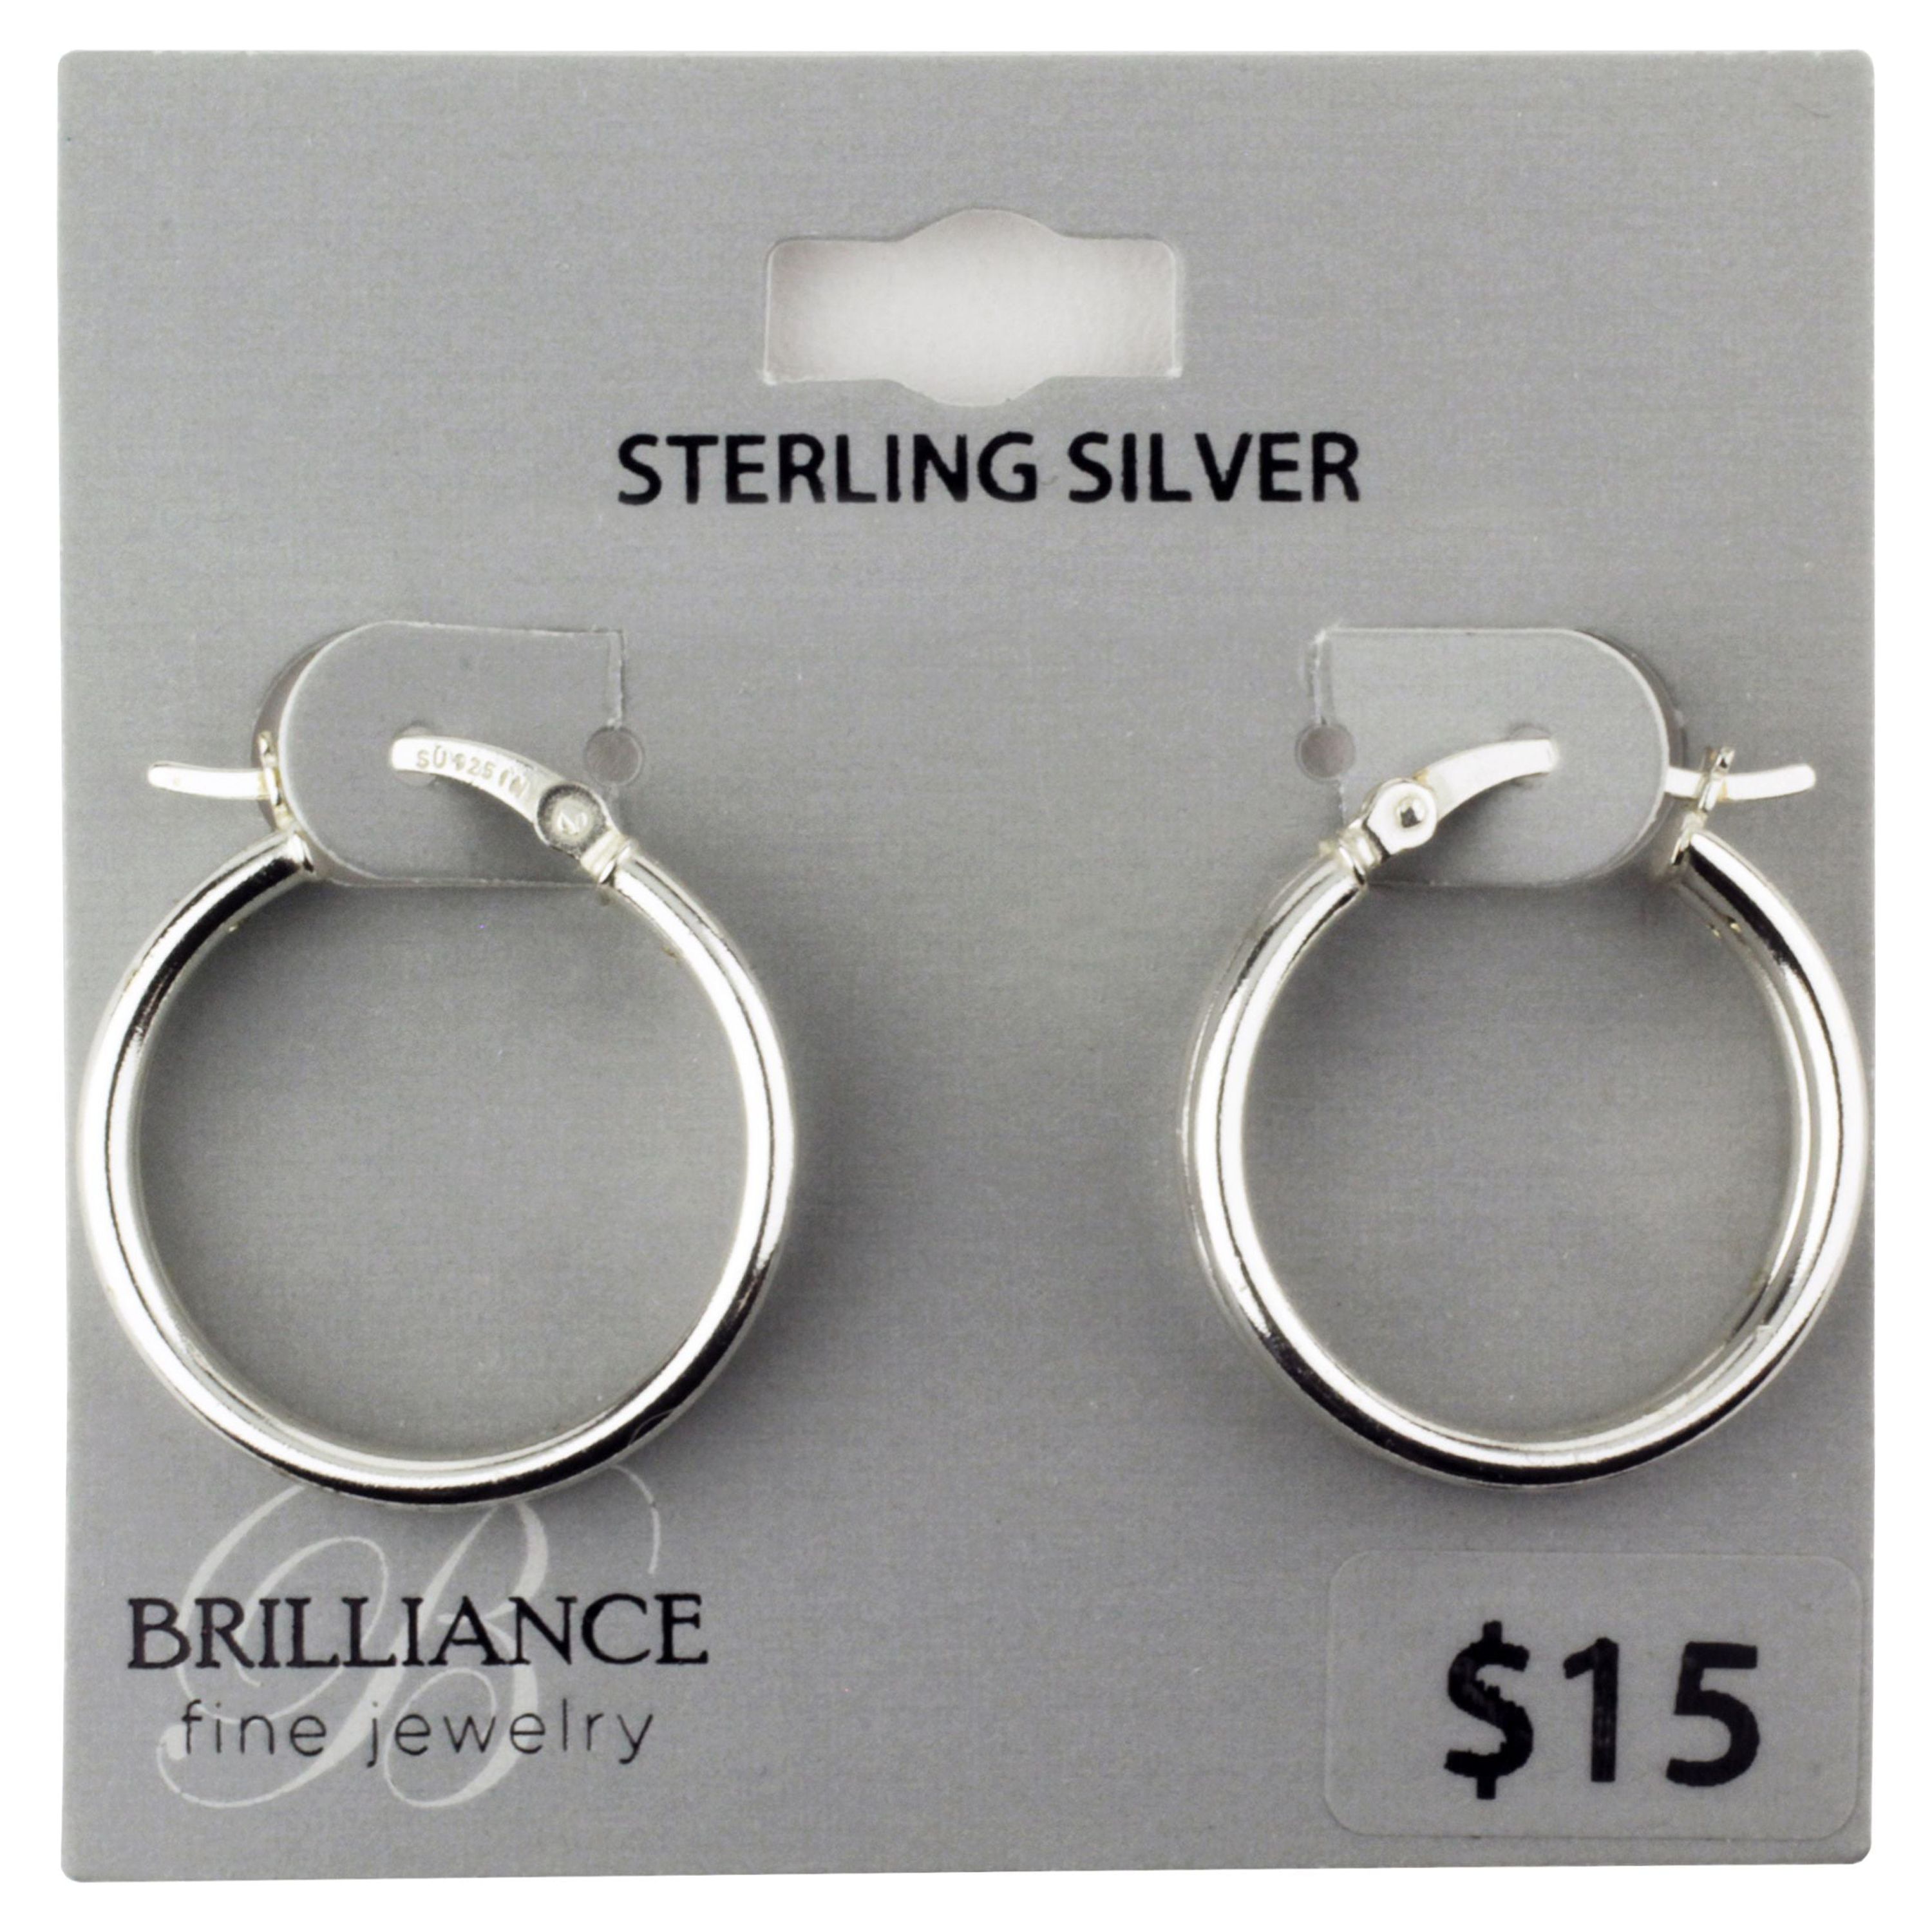 Brilliance Fine Jewelry Sterling Silver Round Click Top Hoop Earrings - image 2 of 2